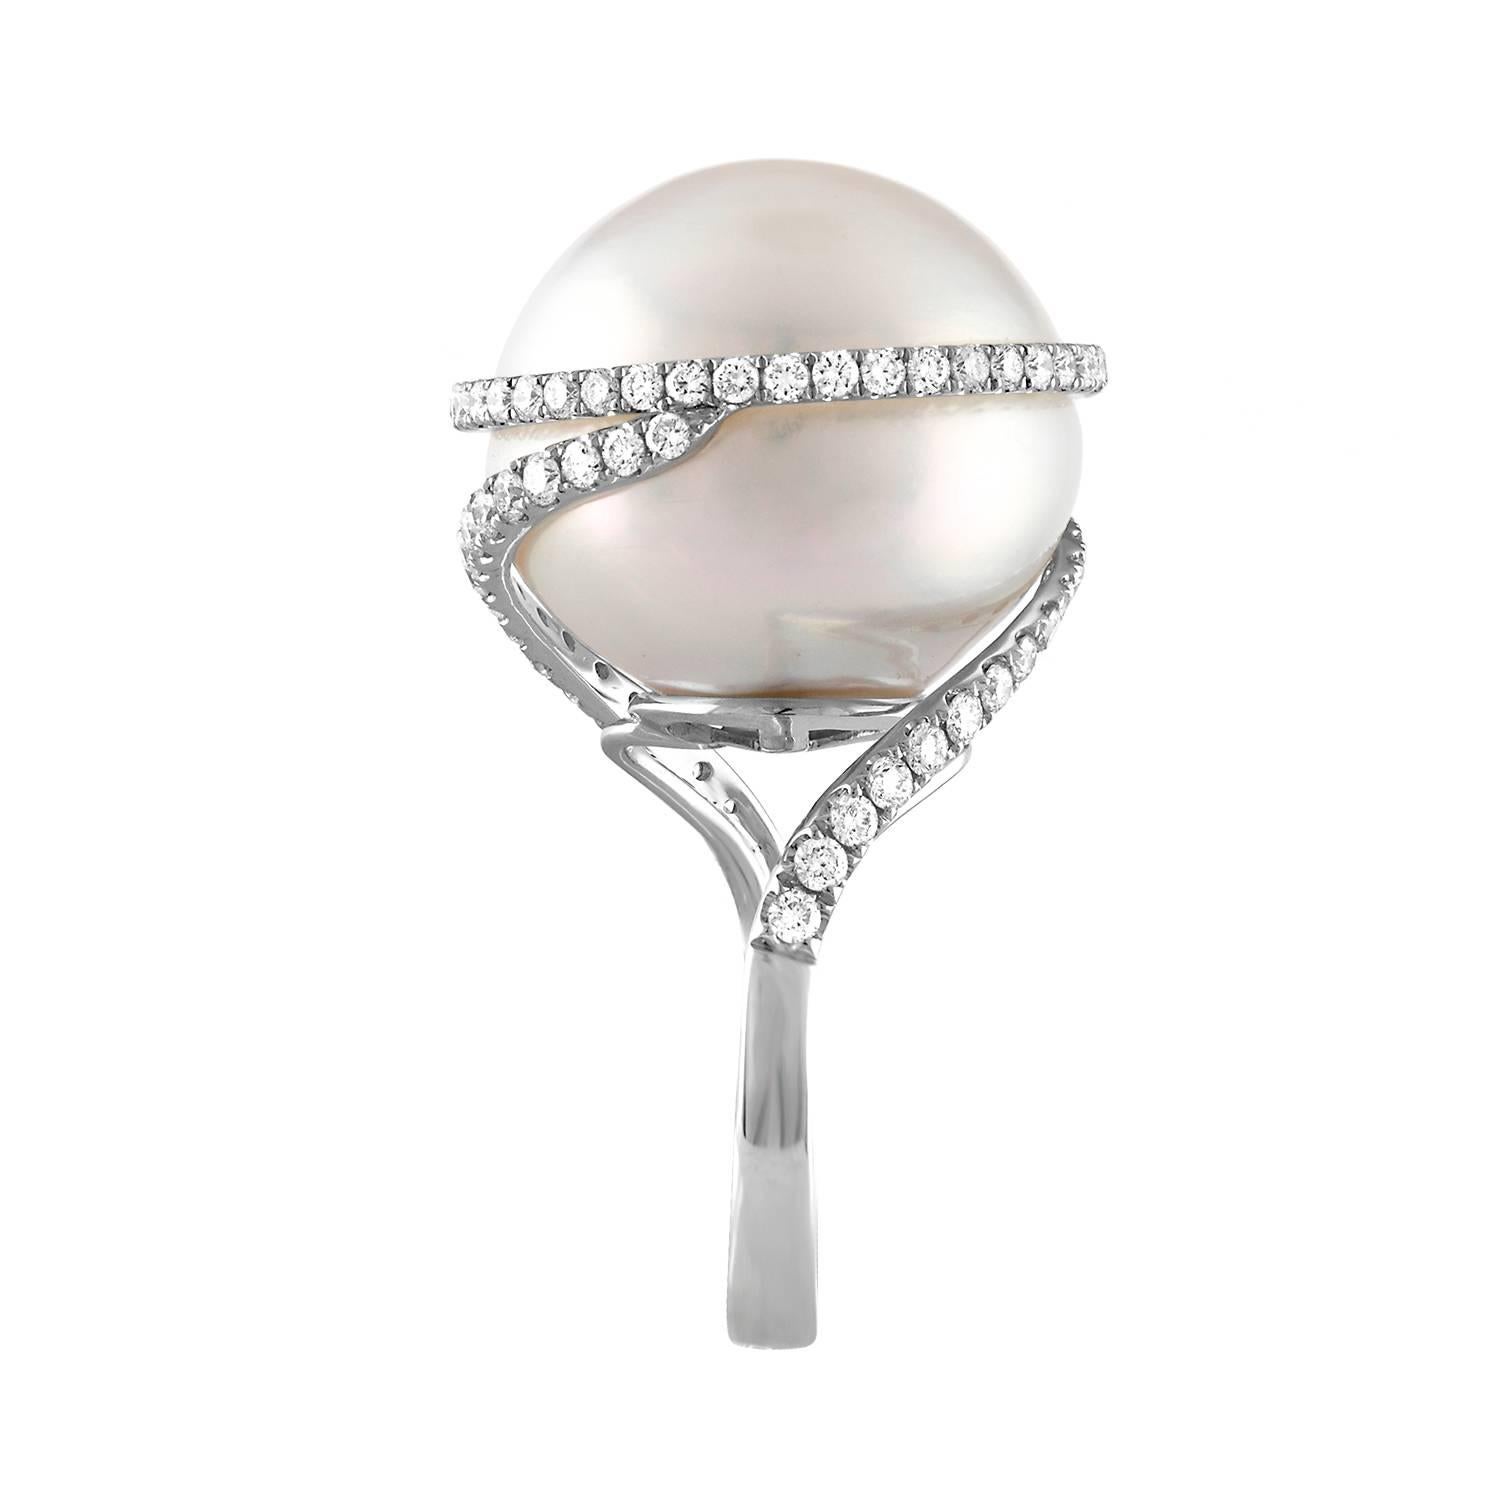 Custom One-of-Kind Ring
The ring is 18K White Gold
The pearl is 18MM South Sea Pearl
There are 1.16 Carats in Diamonds G/H SI
The ring is a size 6.5, sizable
The ring weighs 14.5 grams 